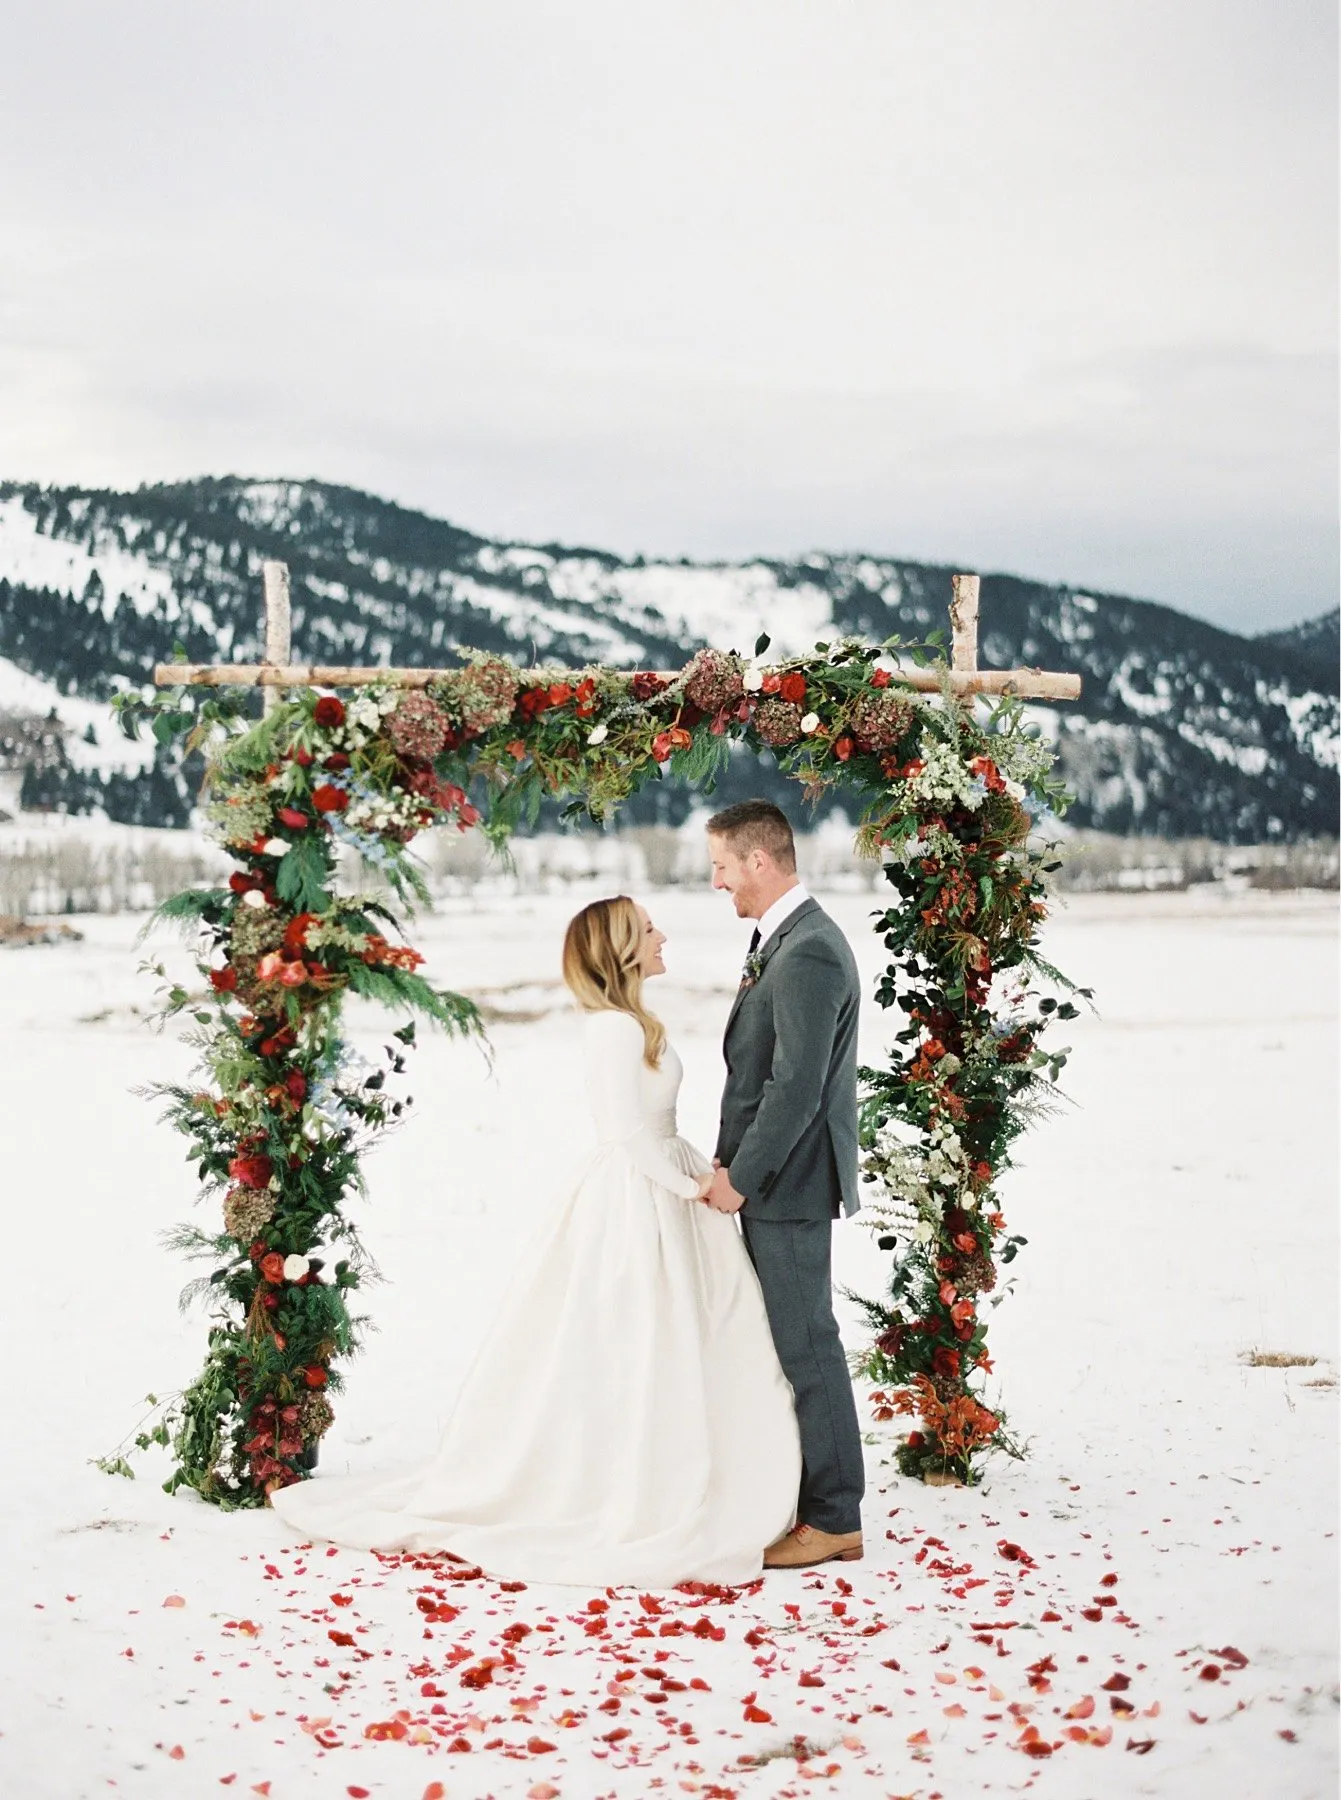 Bride and groom in a snowy field under an arch